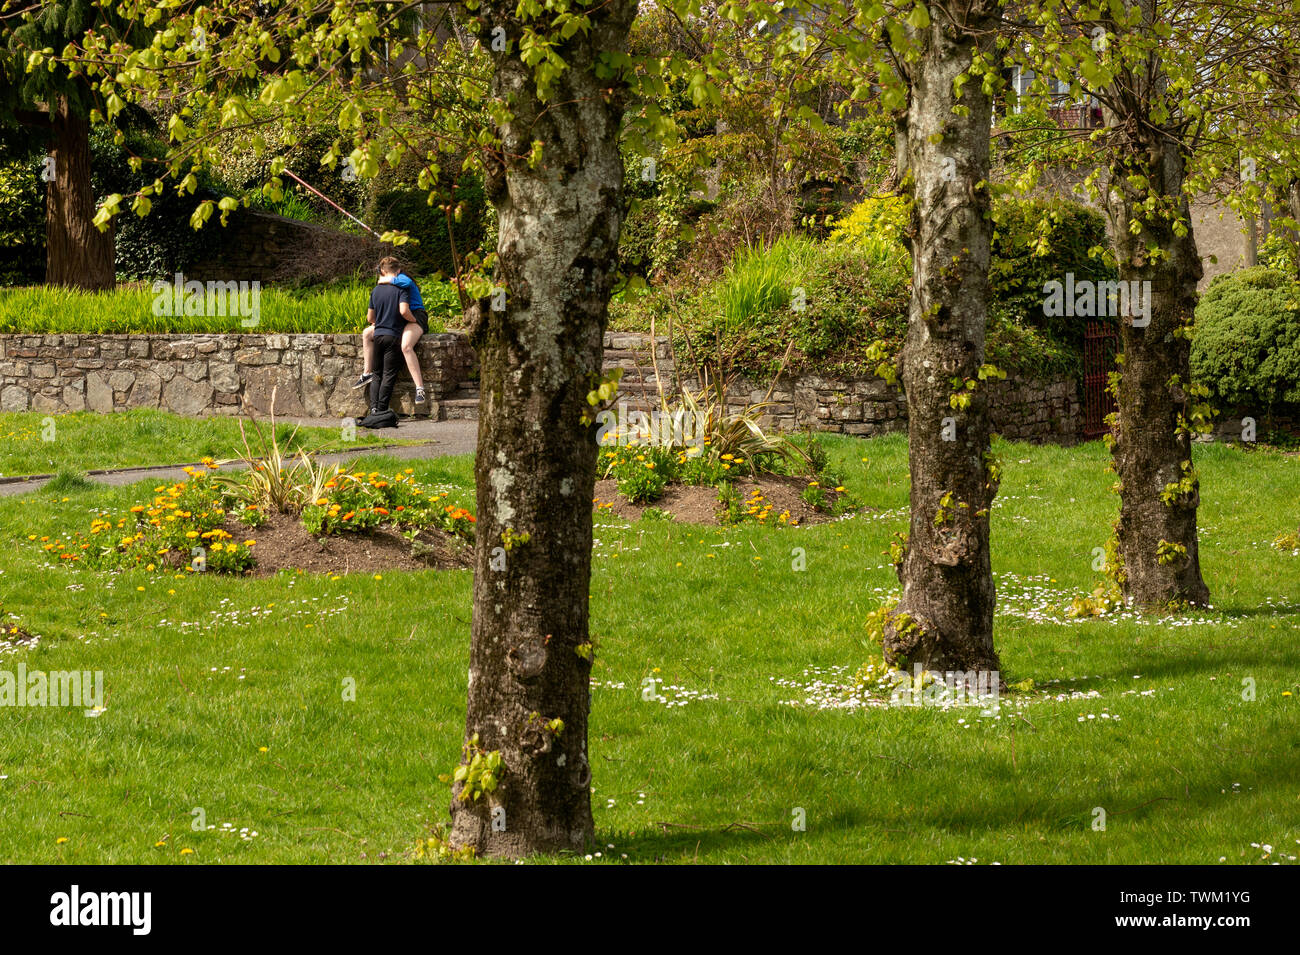 Young people teen couple making out kissing embracing unashamed in public park in Kinsale, County Cork, Ireland Stock Photo